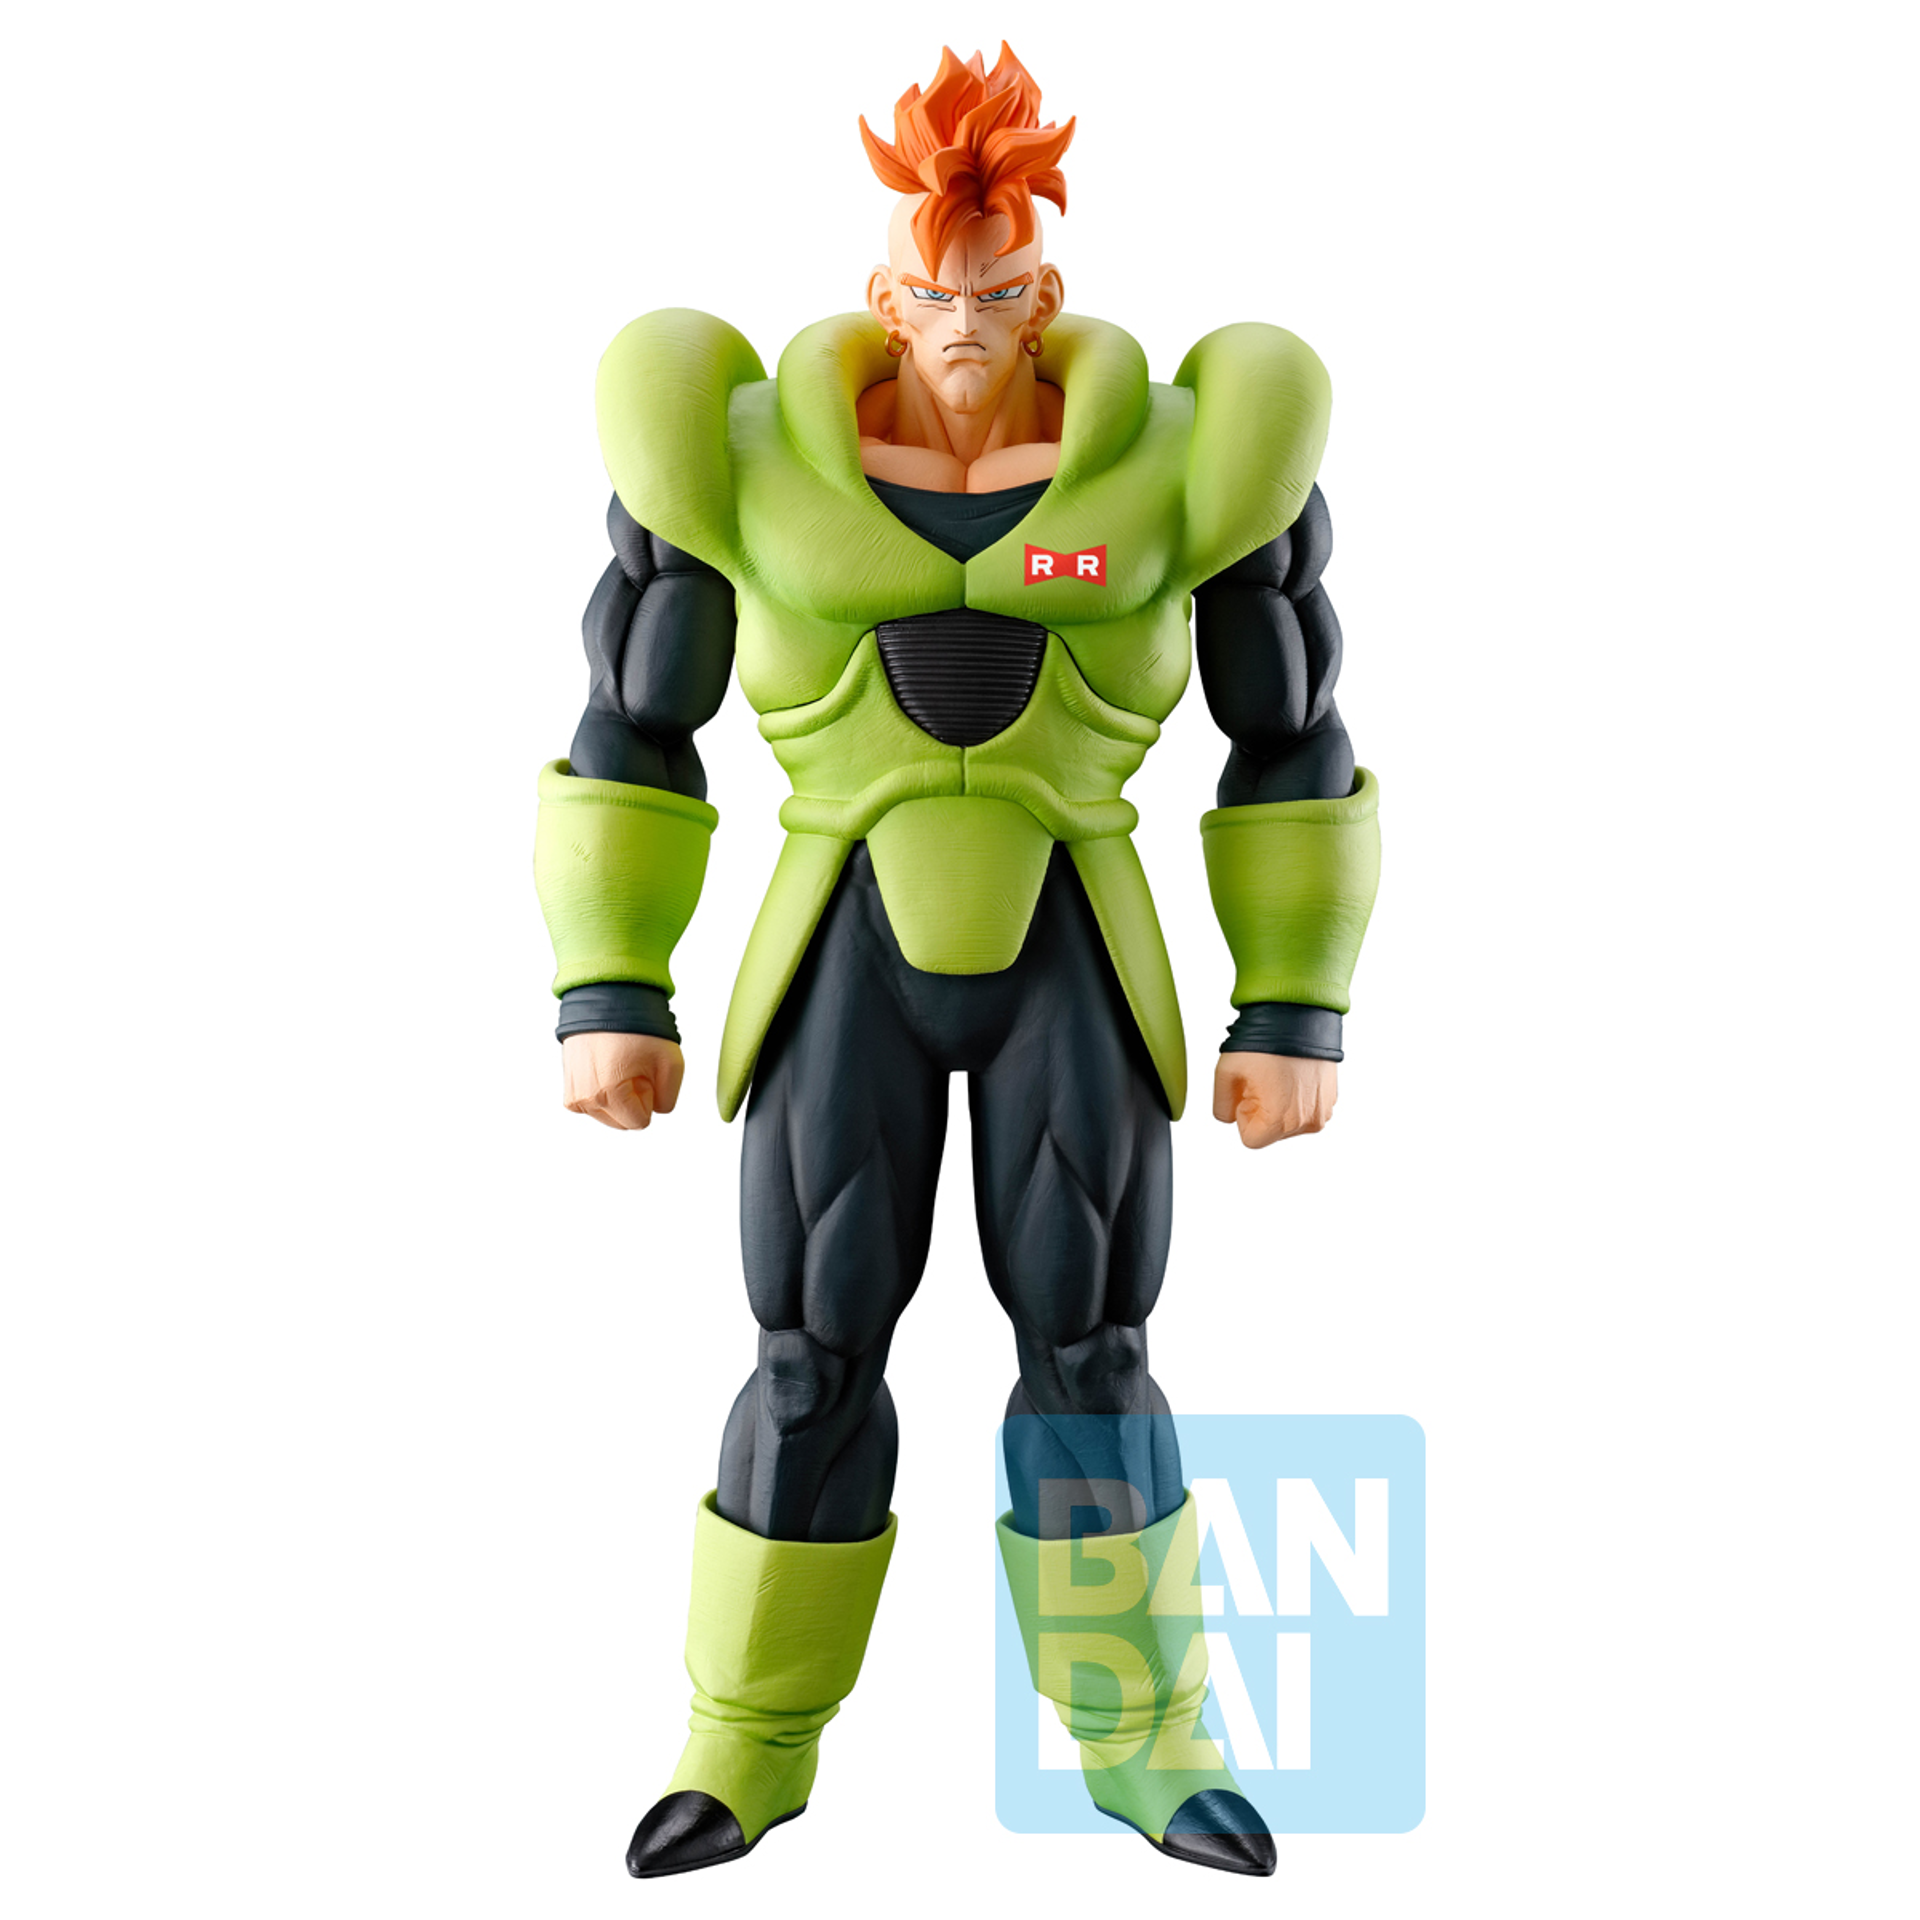 Acheter Dragon Ball Z Ichibansho - Android Fear - Android 16 Figure 26.5 -  Figurines prix promo neuf et occasion pas cher